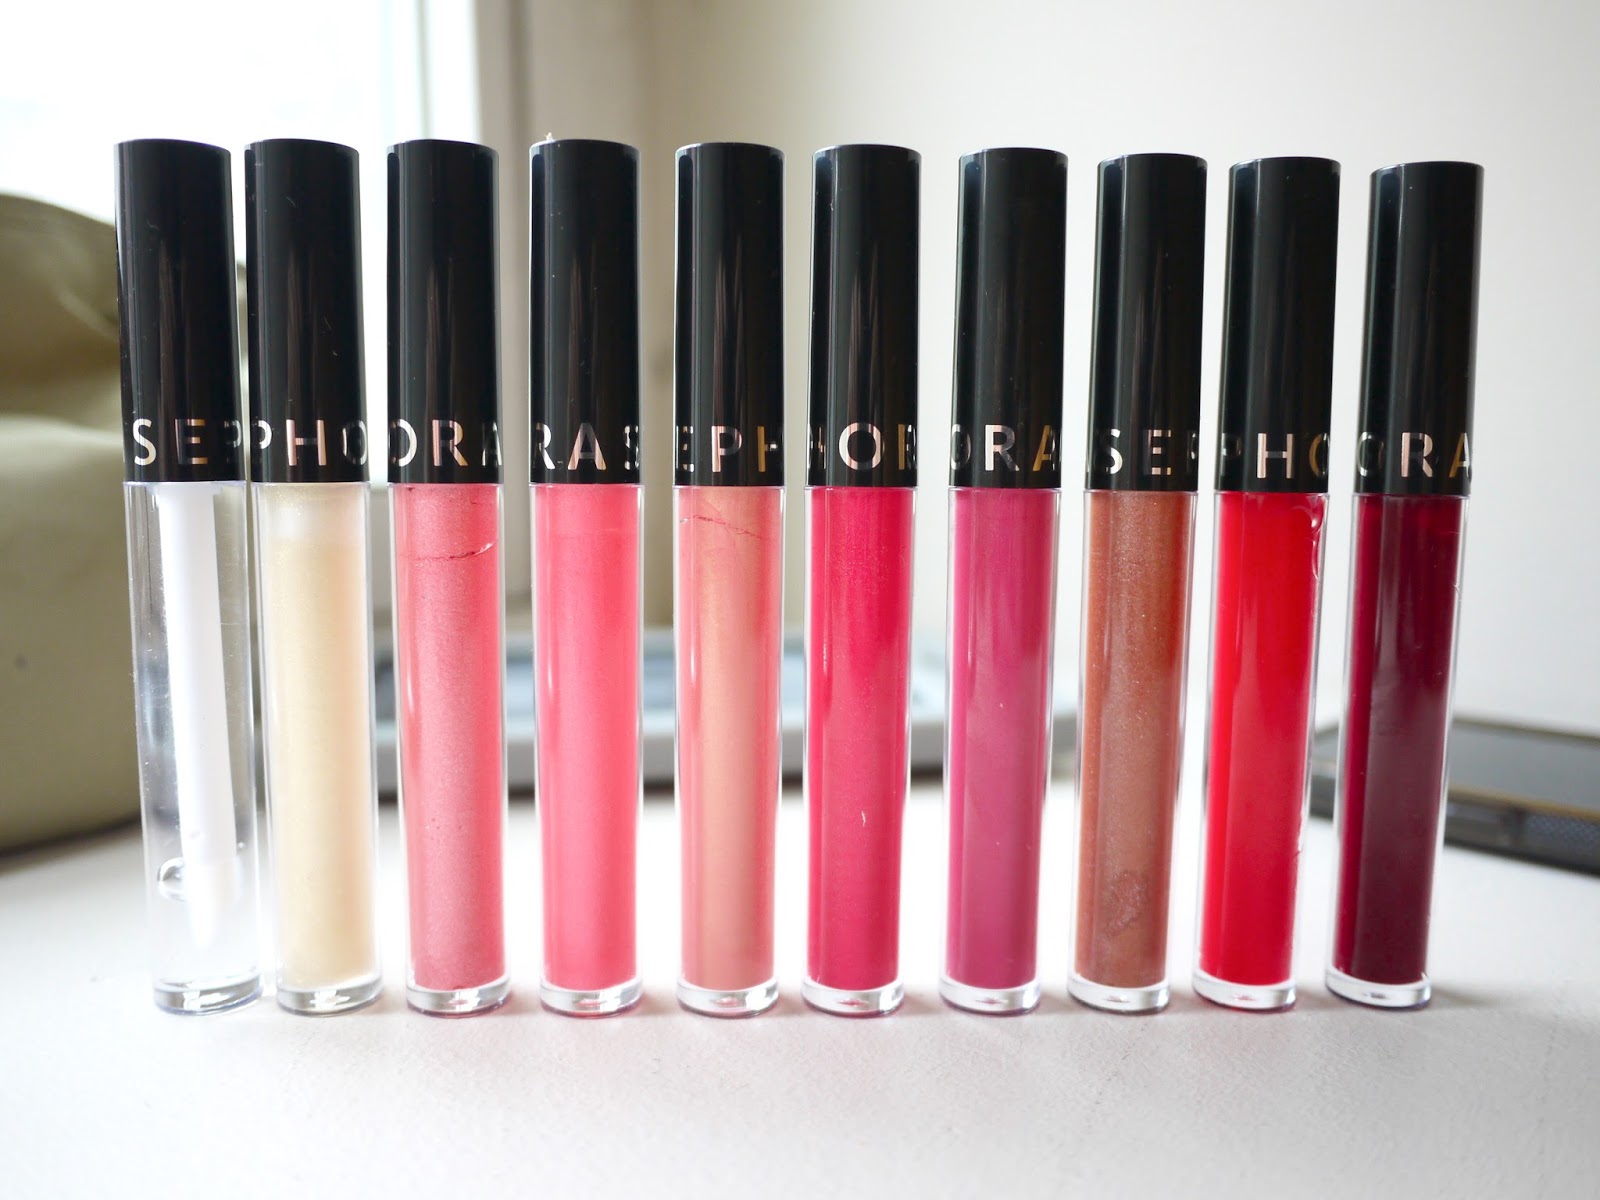 Sephora Endless Kisses: Lip Gloss Set review and swatch